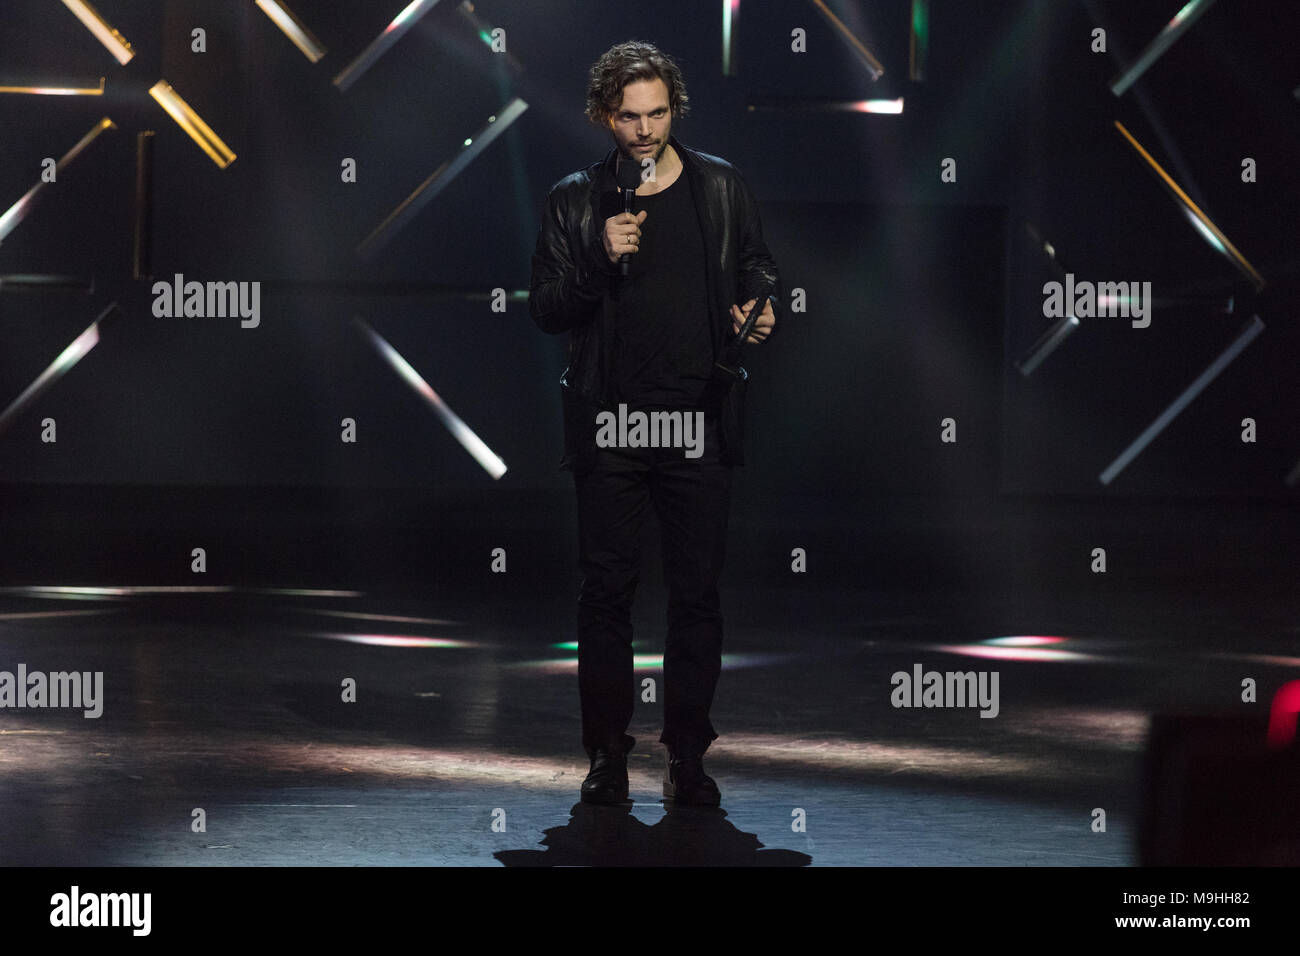 Norway, Oslo - February 25, 2018. The Norwegian percussionist and composer Håkon Mørch Stene receives the price Åpen Klasse on behalf of Nils Økland during the Norwegian Grammy Awards, Spellemannprisen 2017, at Oslo Konserthus in Oslo. (Photo credit: Gonzales Photo - Stian S. Moller). Stock Photo